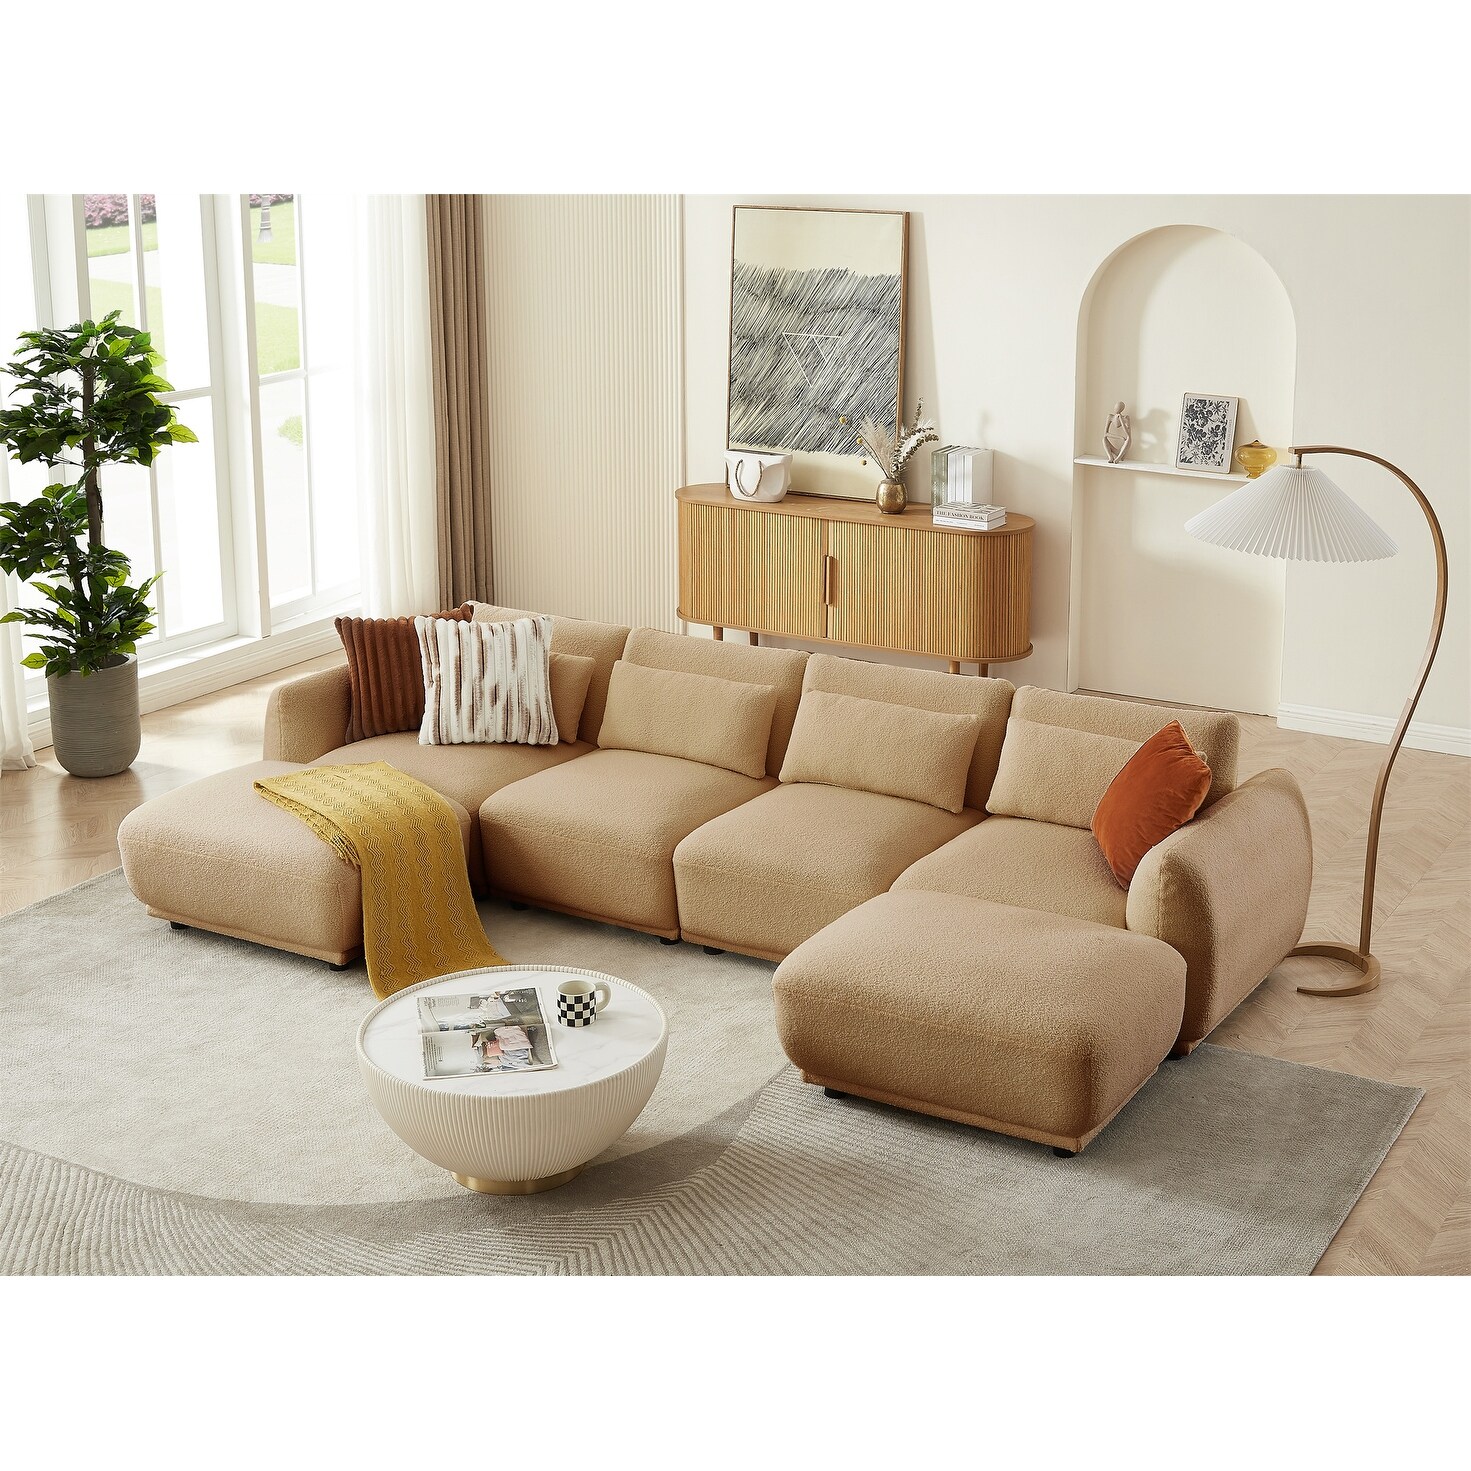 https://ak1.ostkcdn.com/images/products/is/images/direct/1179cbe4593fca5482d2b1512e85412e089af04b/Comfy-Lambswool-Modular-Sofa-For-Living-Room%2C-Boucle-Sectional-Sofa-With-Toss-Pillow.jpg